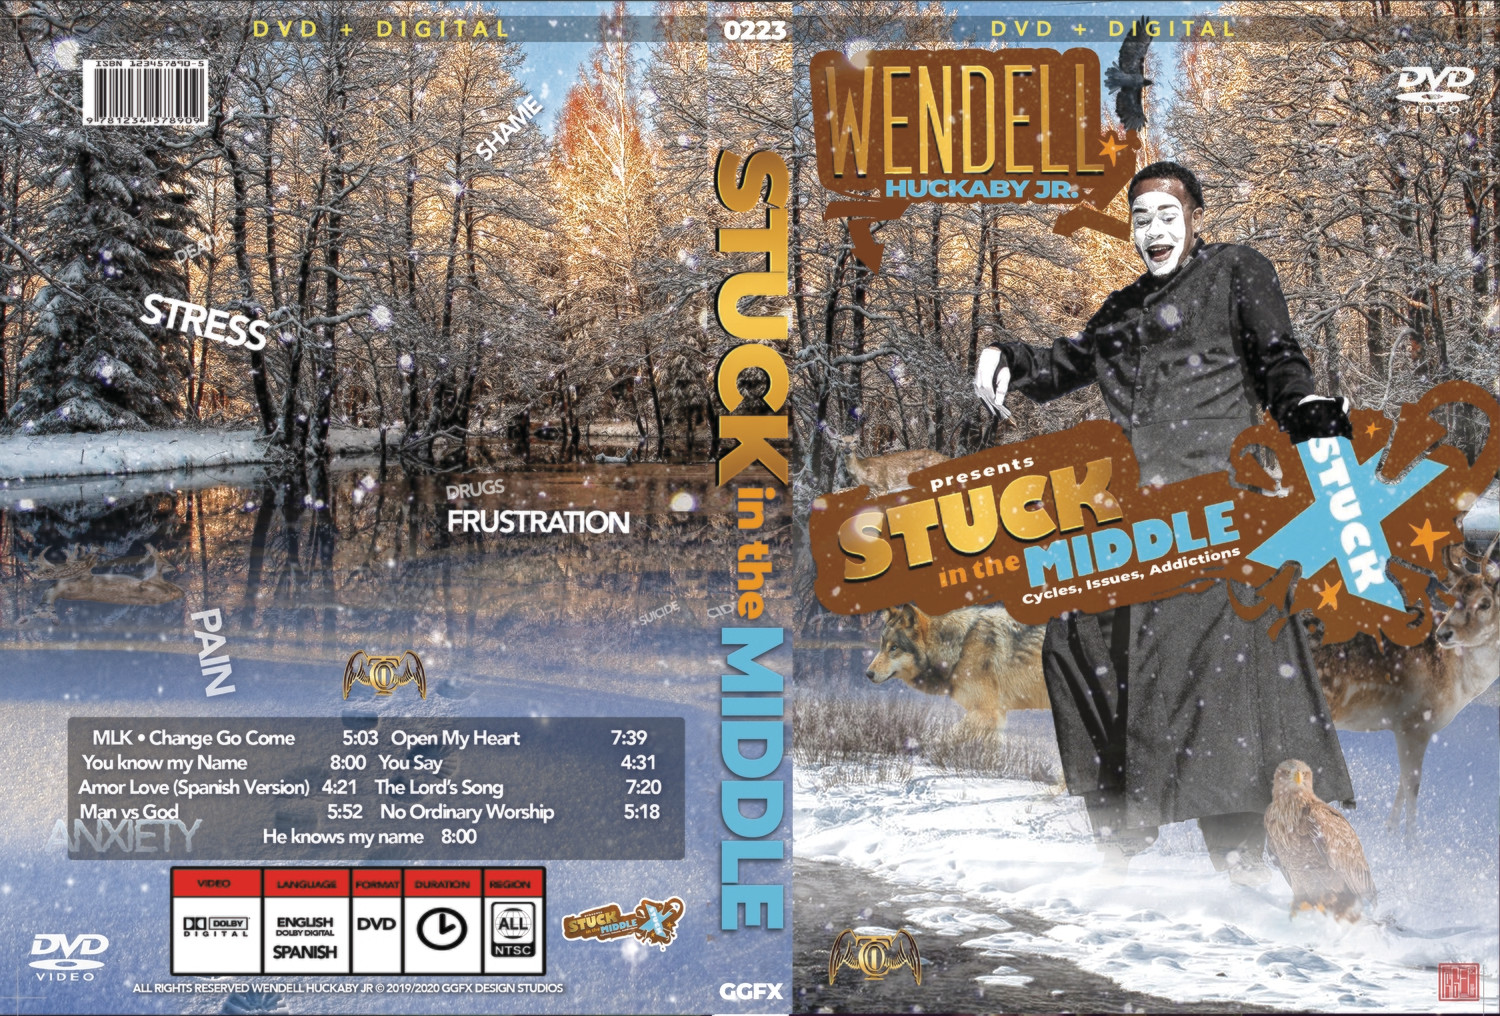 STUCK IN THE MIDDLE DVD